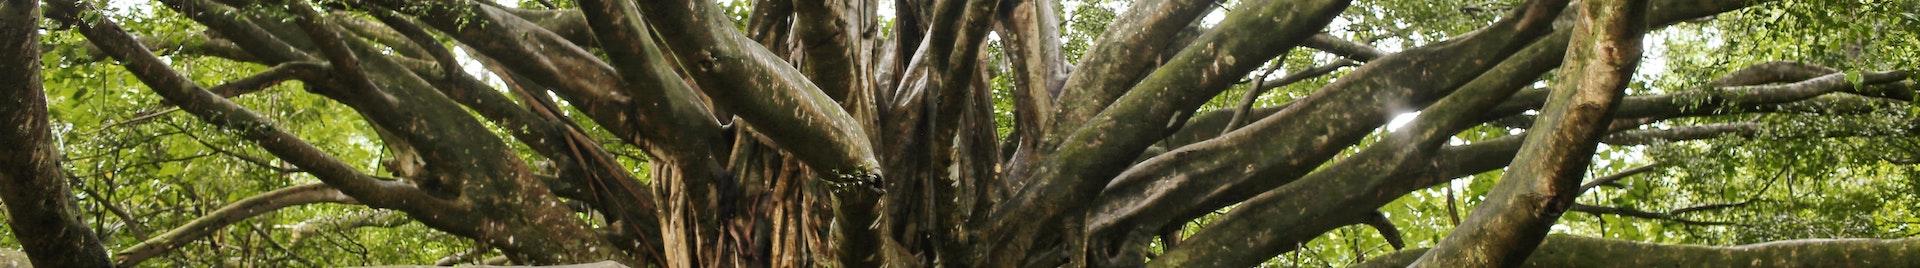 a picture of a banyan tree